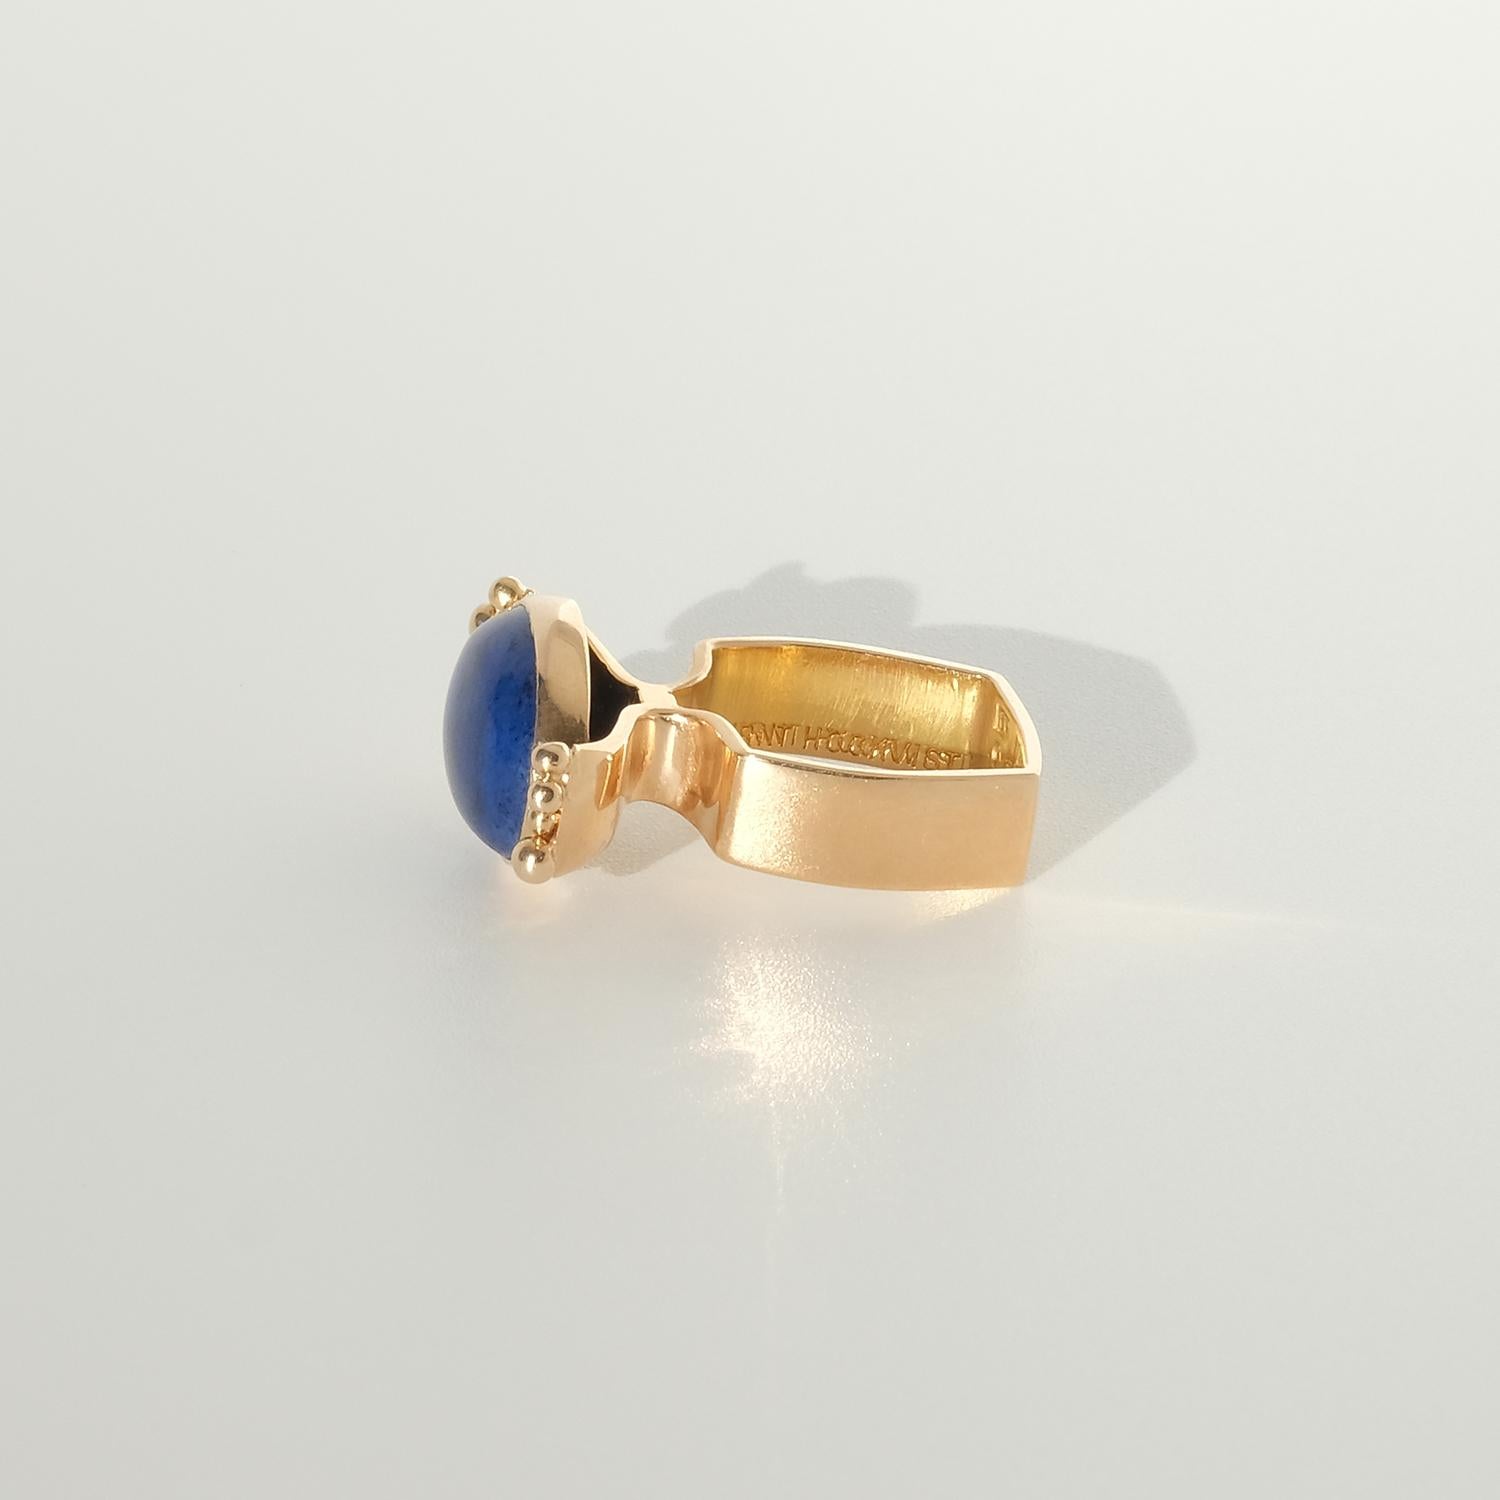 18 K Gold Ring with a Cabochon Cut Lapis Lazuli Stone, Made in 1972 For Sale 8